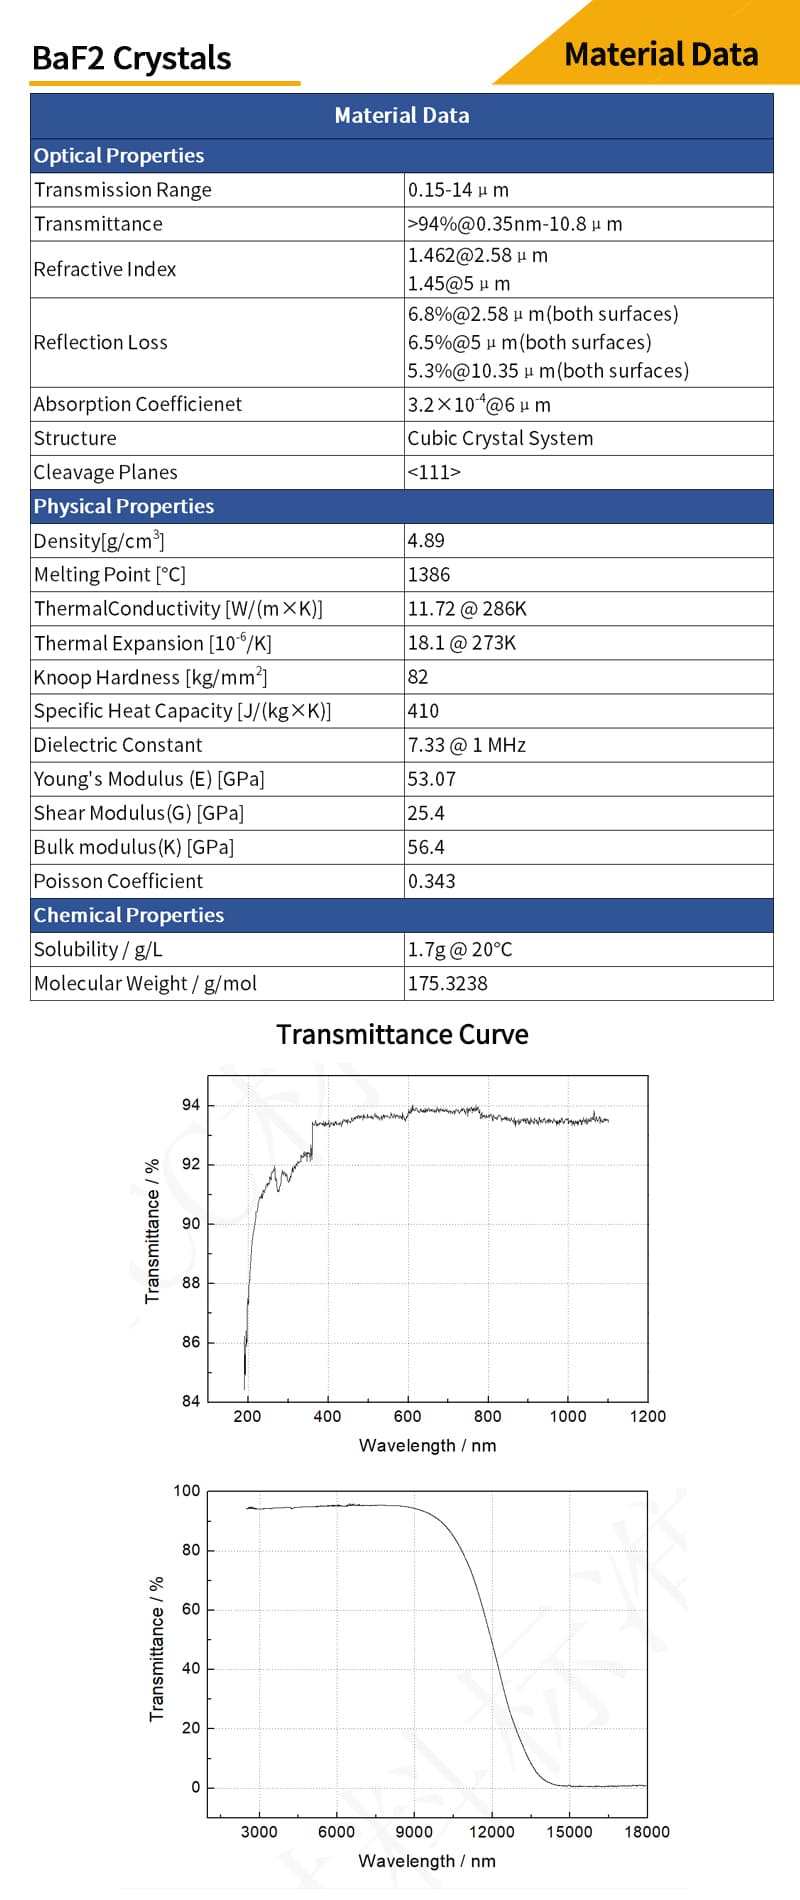 Barium fluoride wedge  window material data and transmittance curves